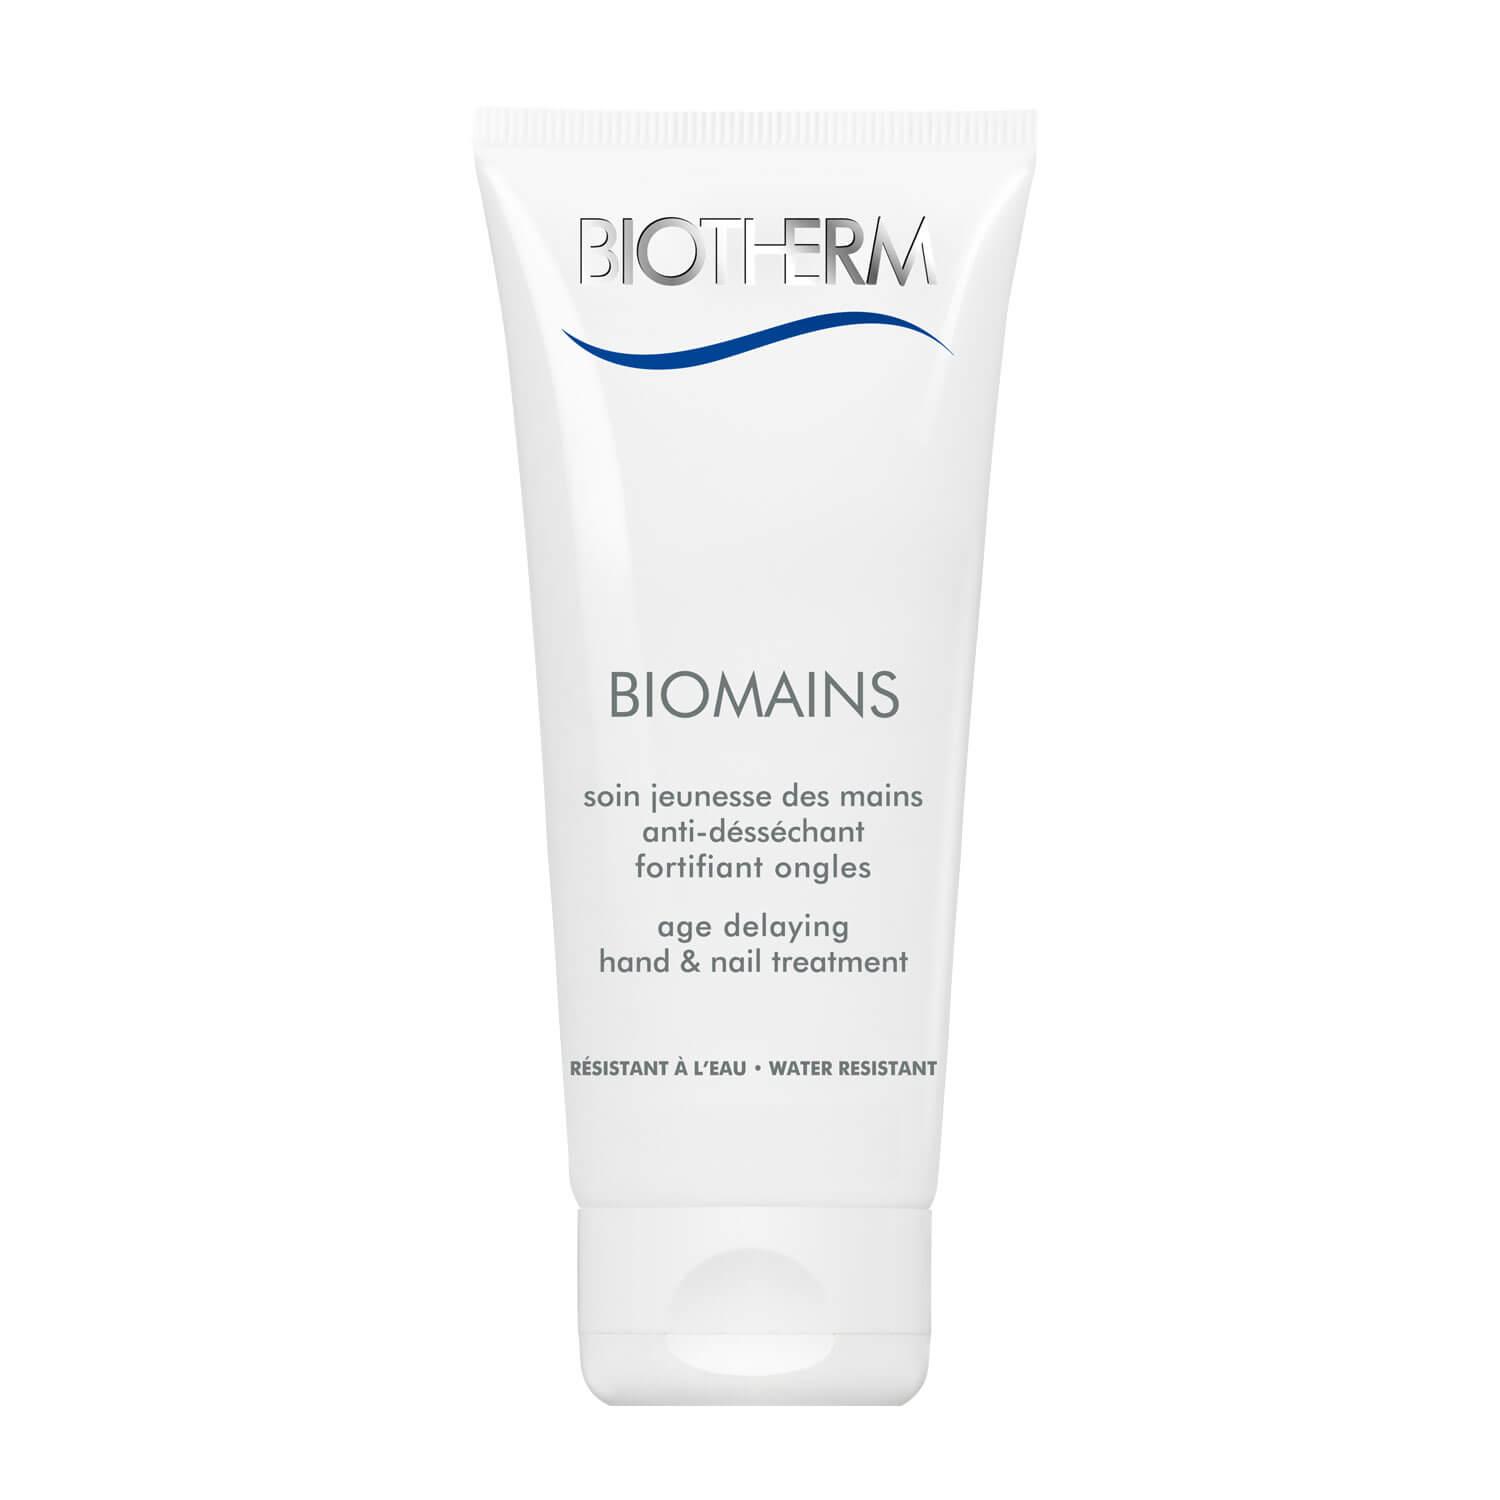 Biotherm Body - Biomains Limited Edition